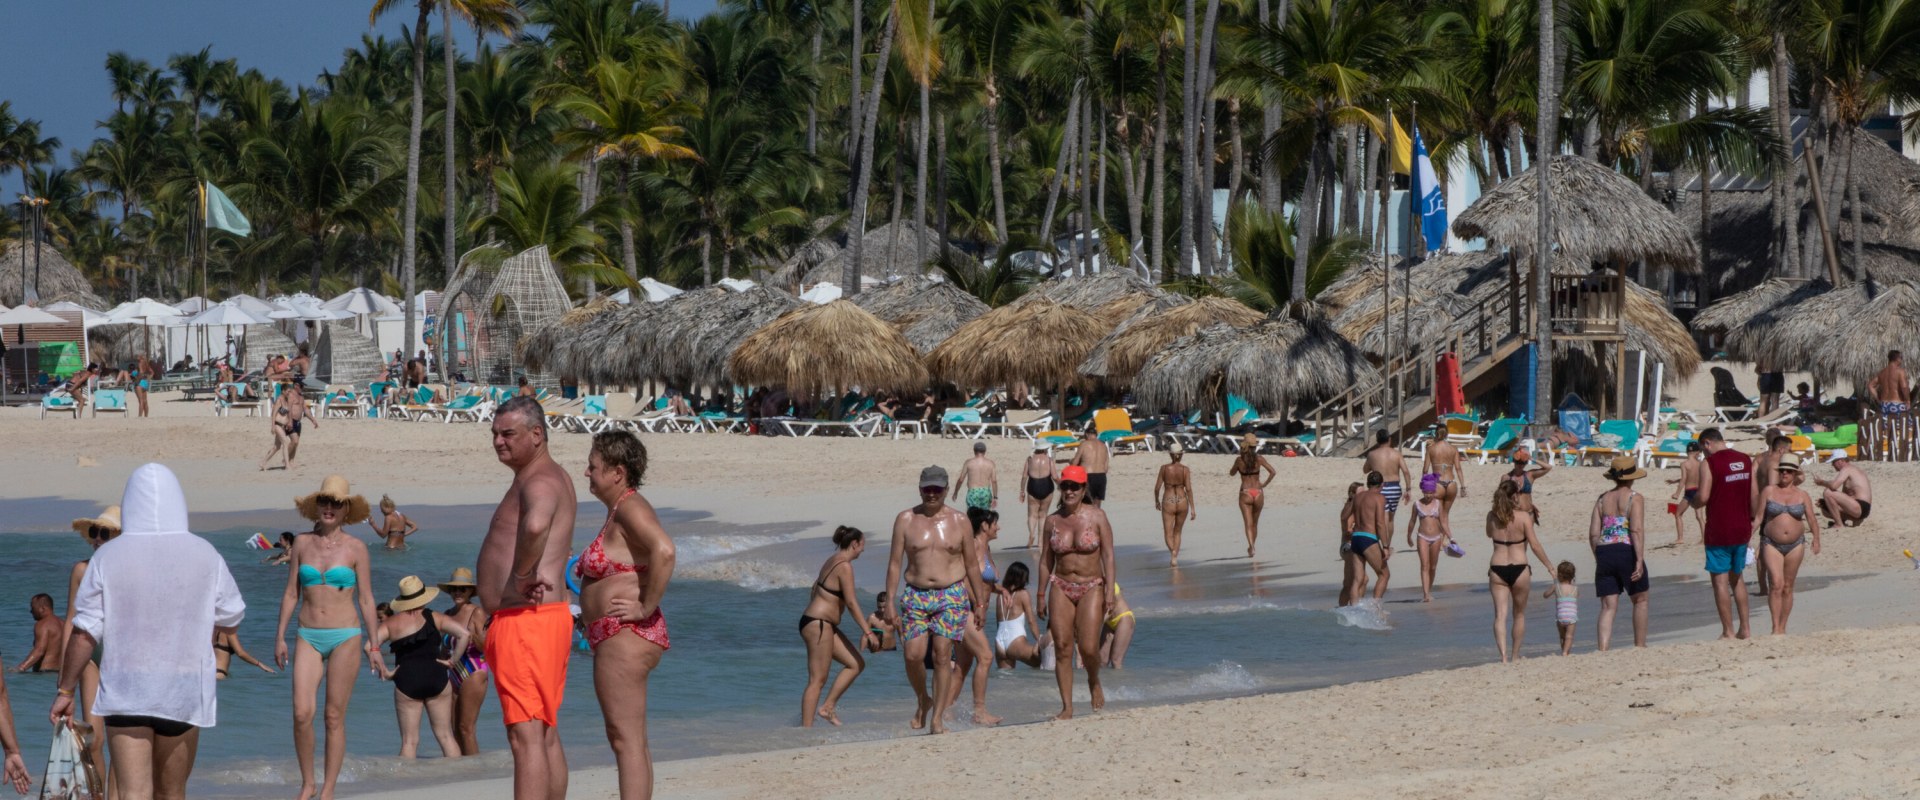 How Many Tourists Visit Punta Cana Every Year?